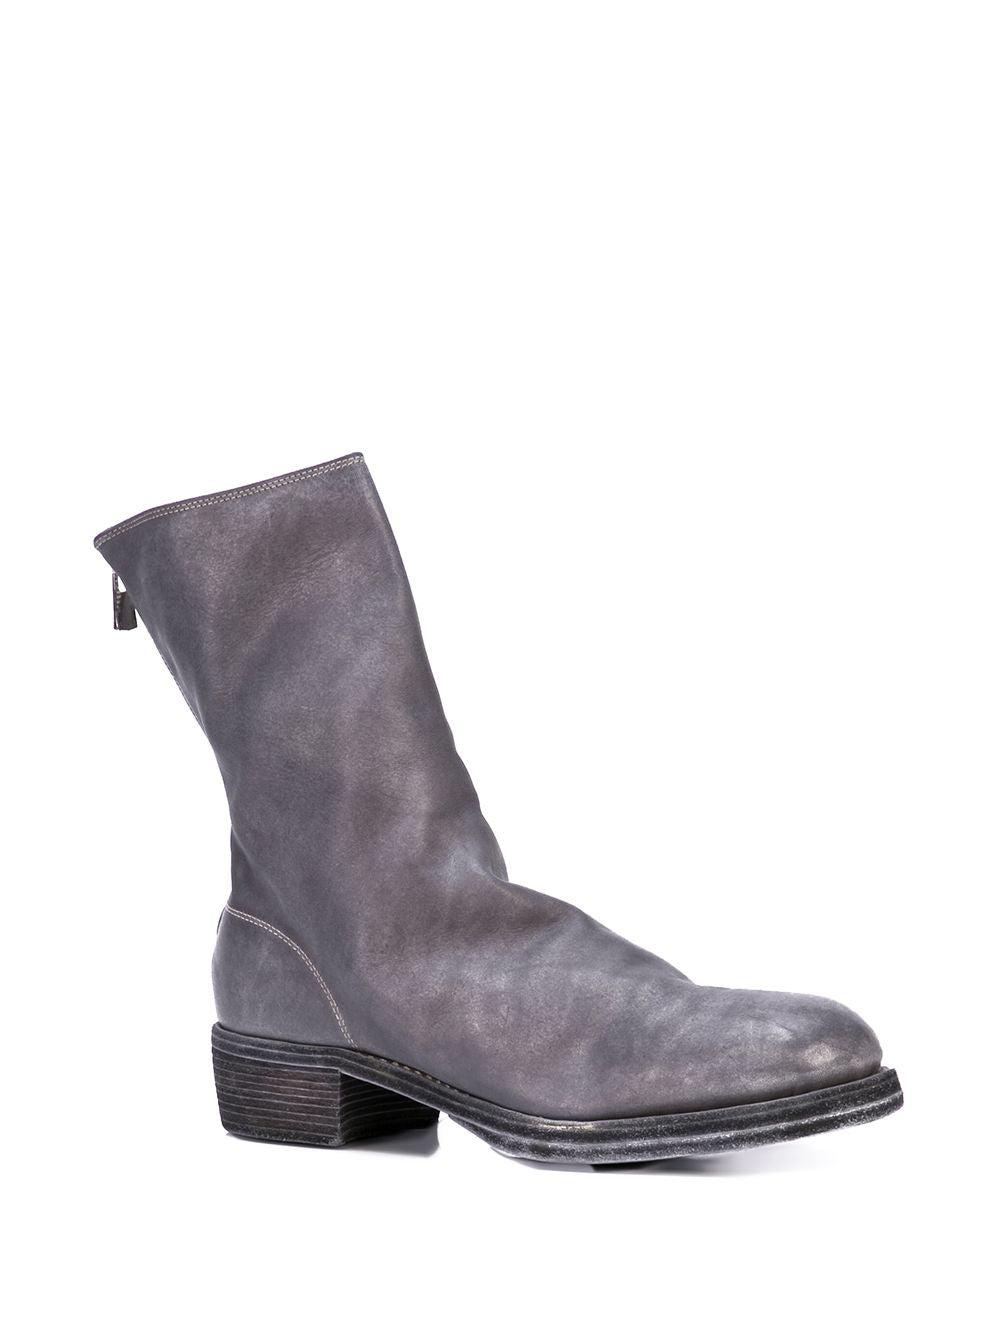 Guidi Leather 788z Classic Backzip Boots in Grey (Gray) for Men 